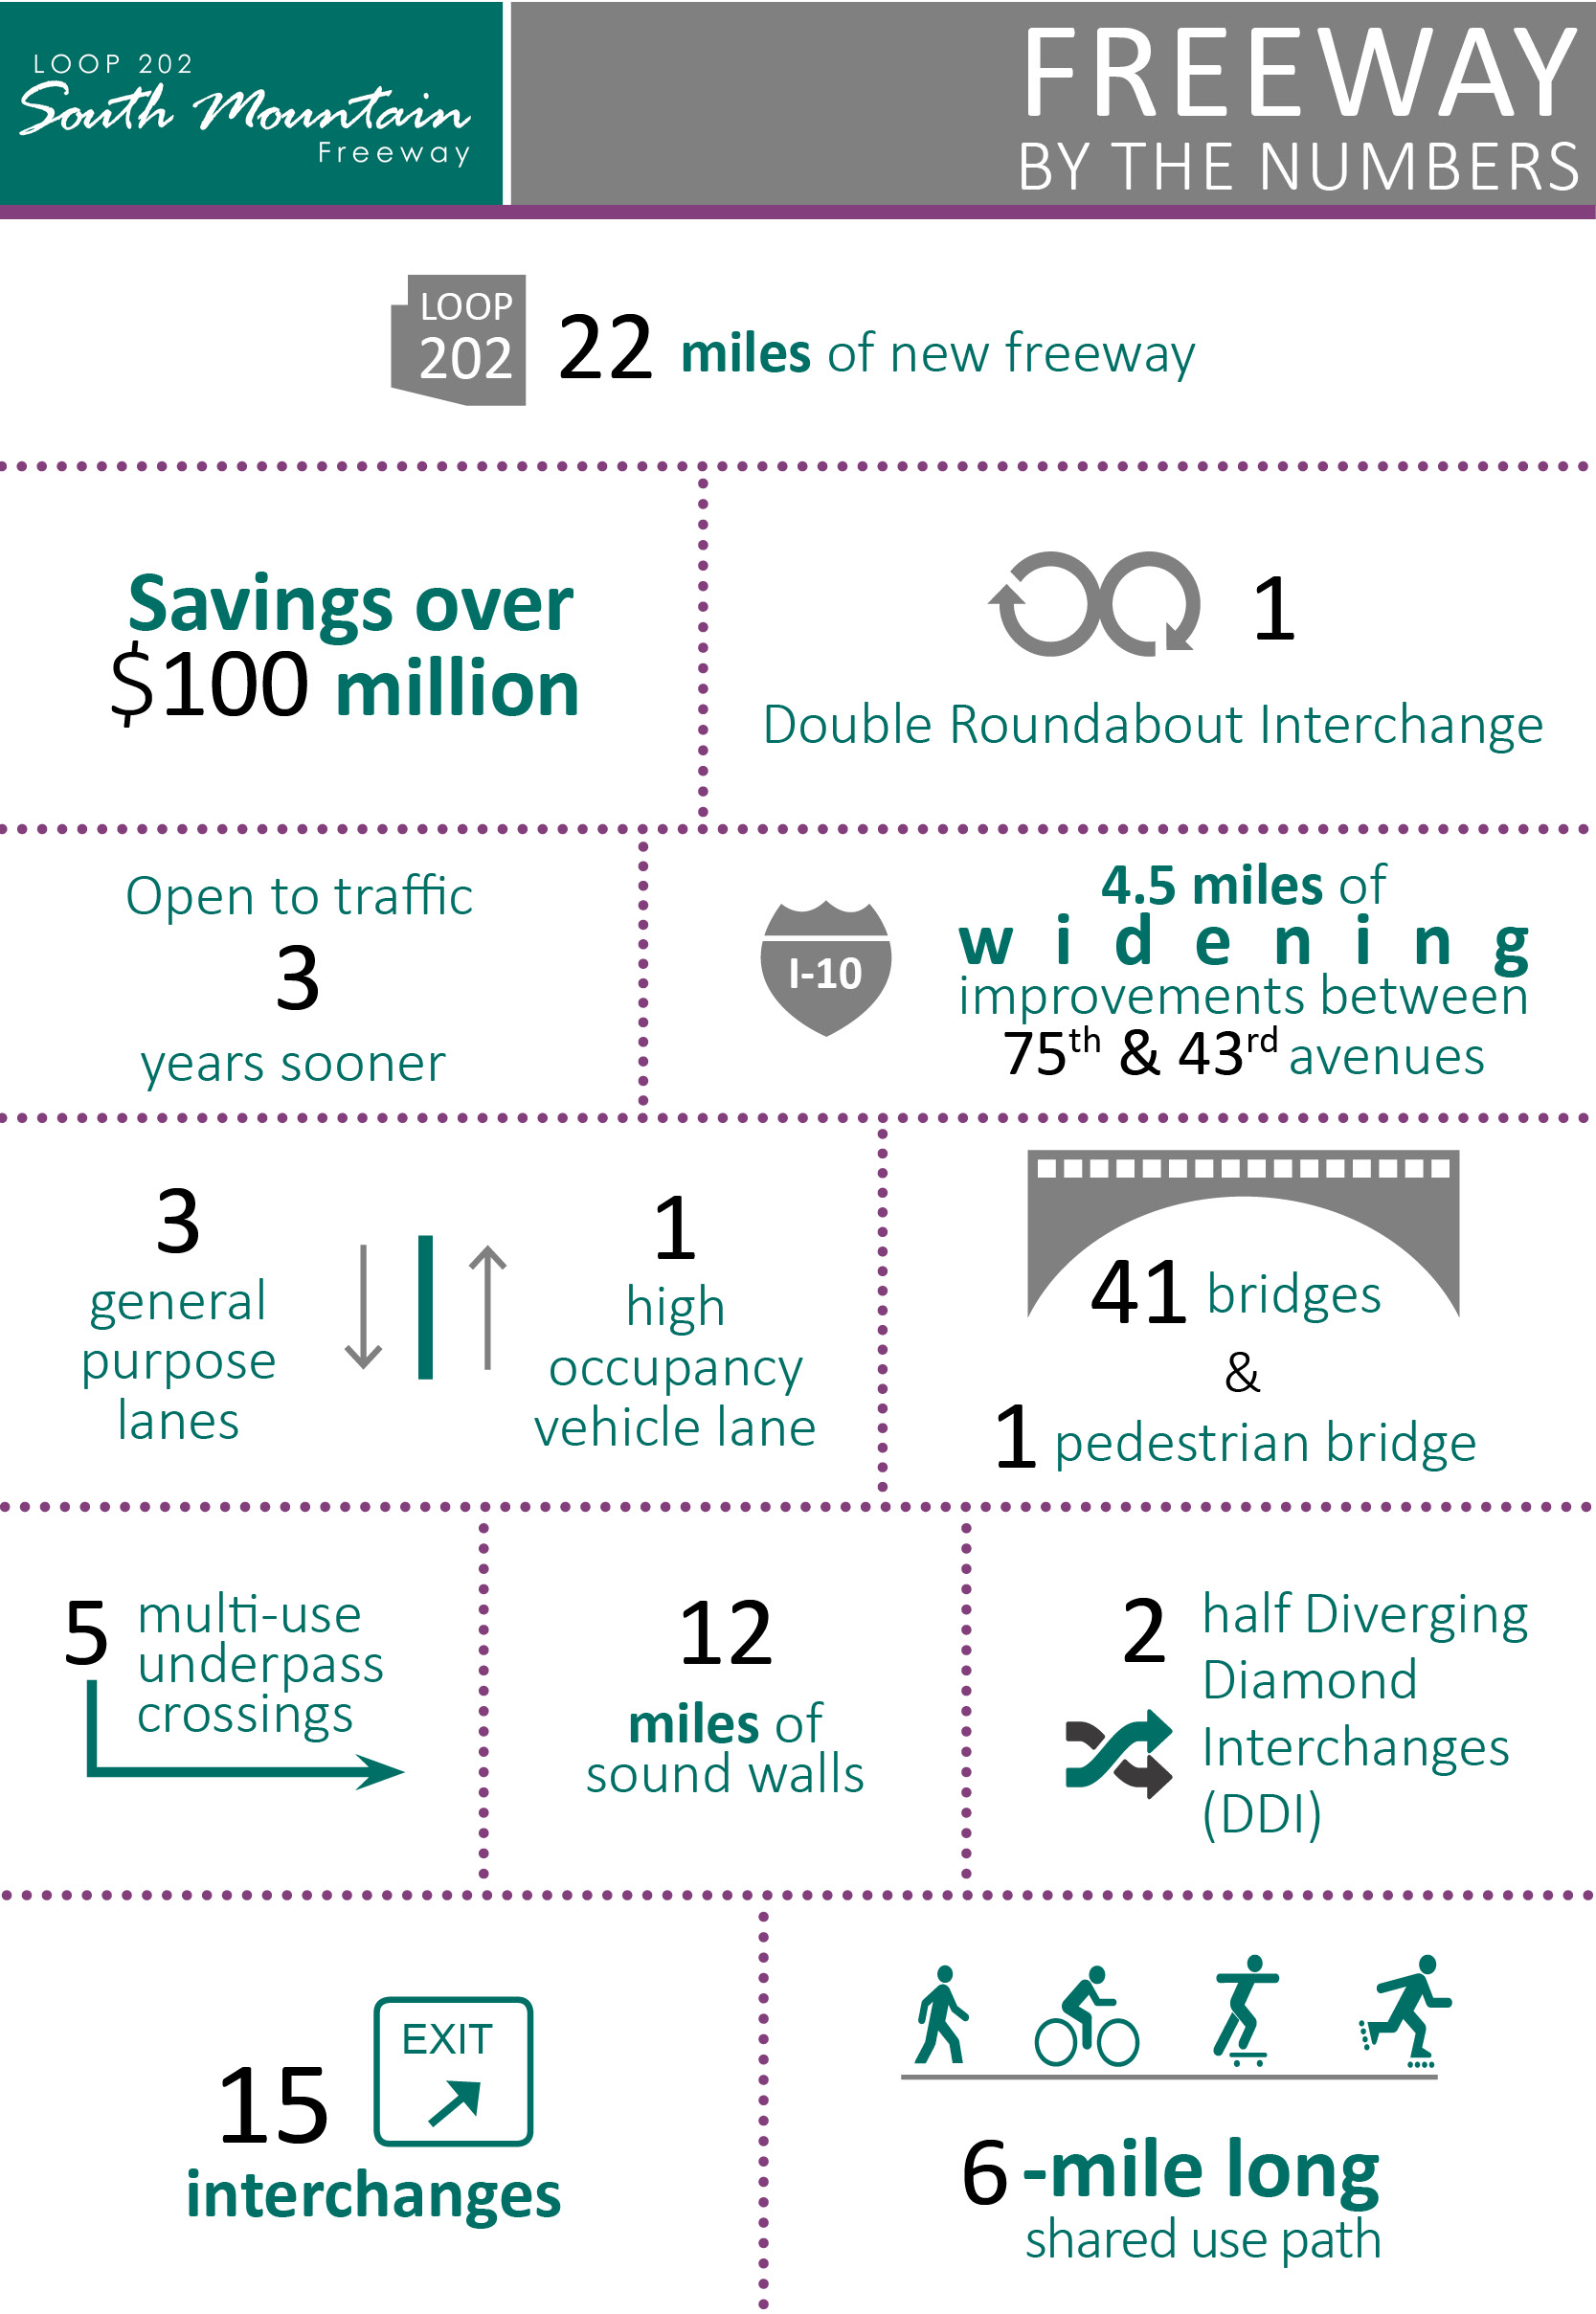 Loop 202 South Mountain Freeway - By the Numbers Infographic